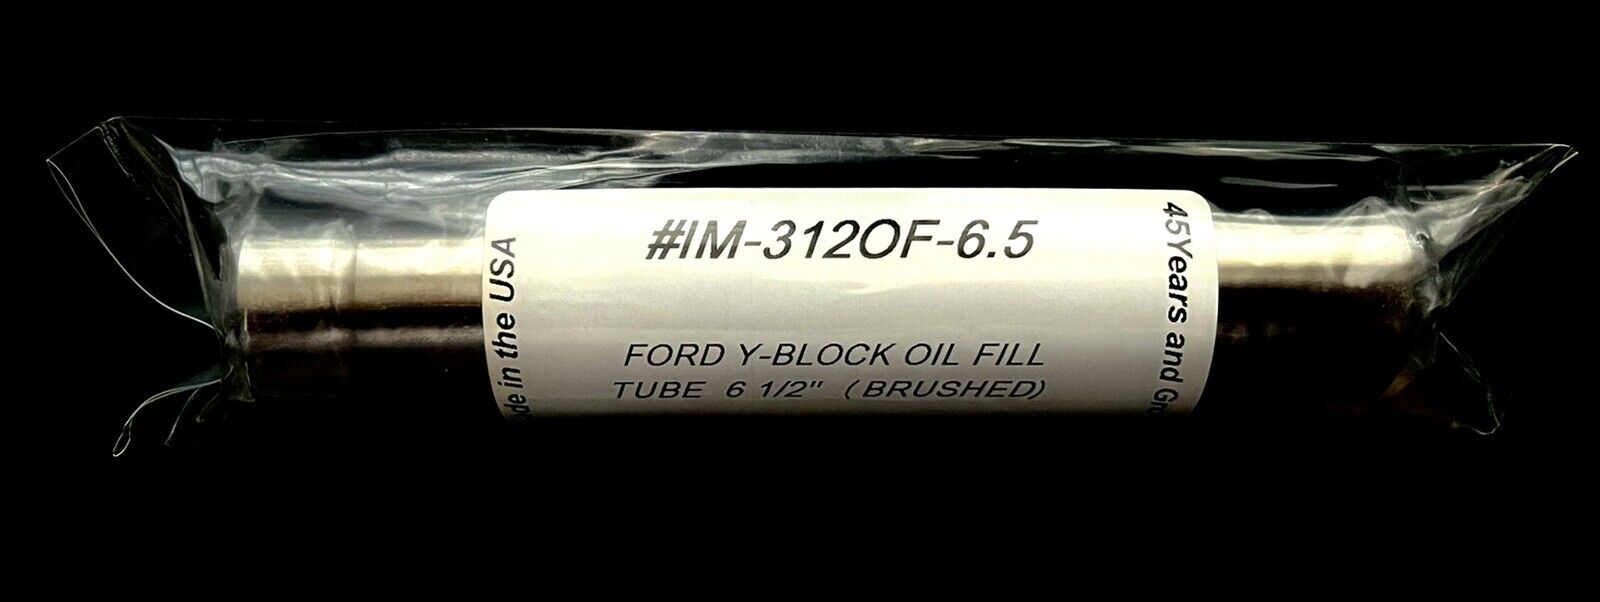 Ford Flat Head, Y-Block, F.E. 6 1/2” Oil Fill Tube With Installation Tool